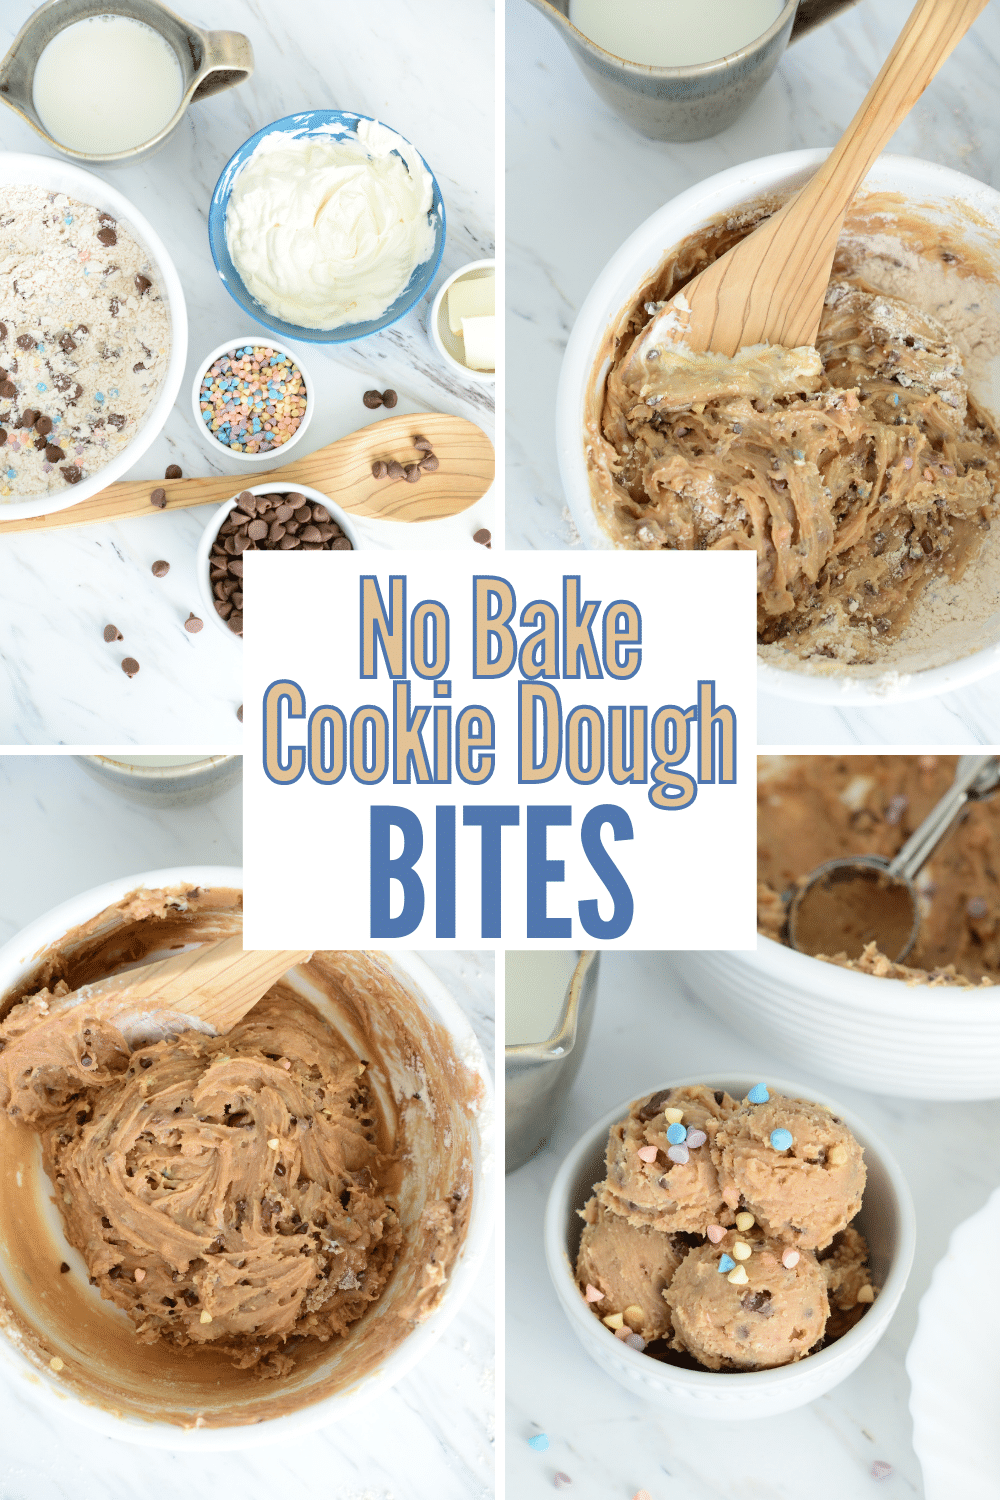 If you love cookie dough, then you’re going to love these No Bake Cookie Dough Bites! They’re perfect when you’re craving something sweet. #cookiedoughbites #nobake #cookiedough via @wondermomwannab